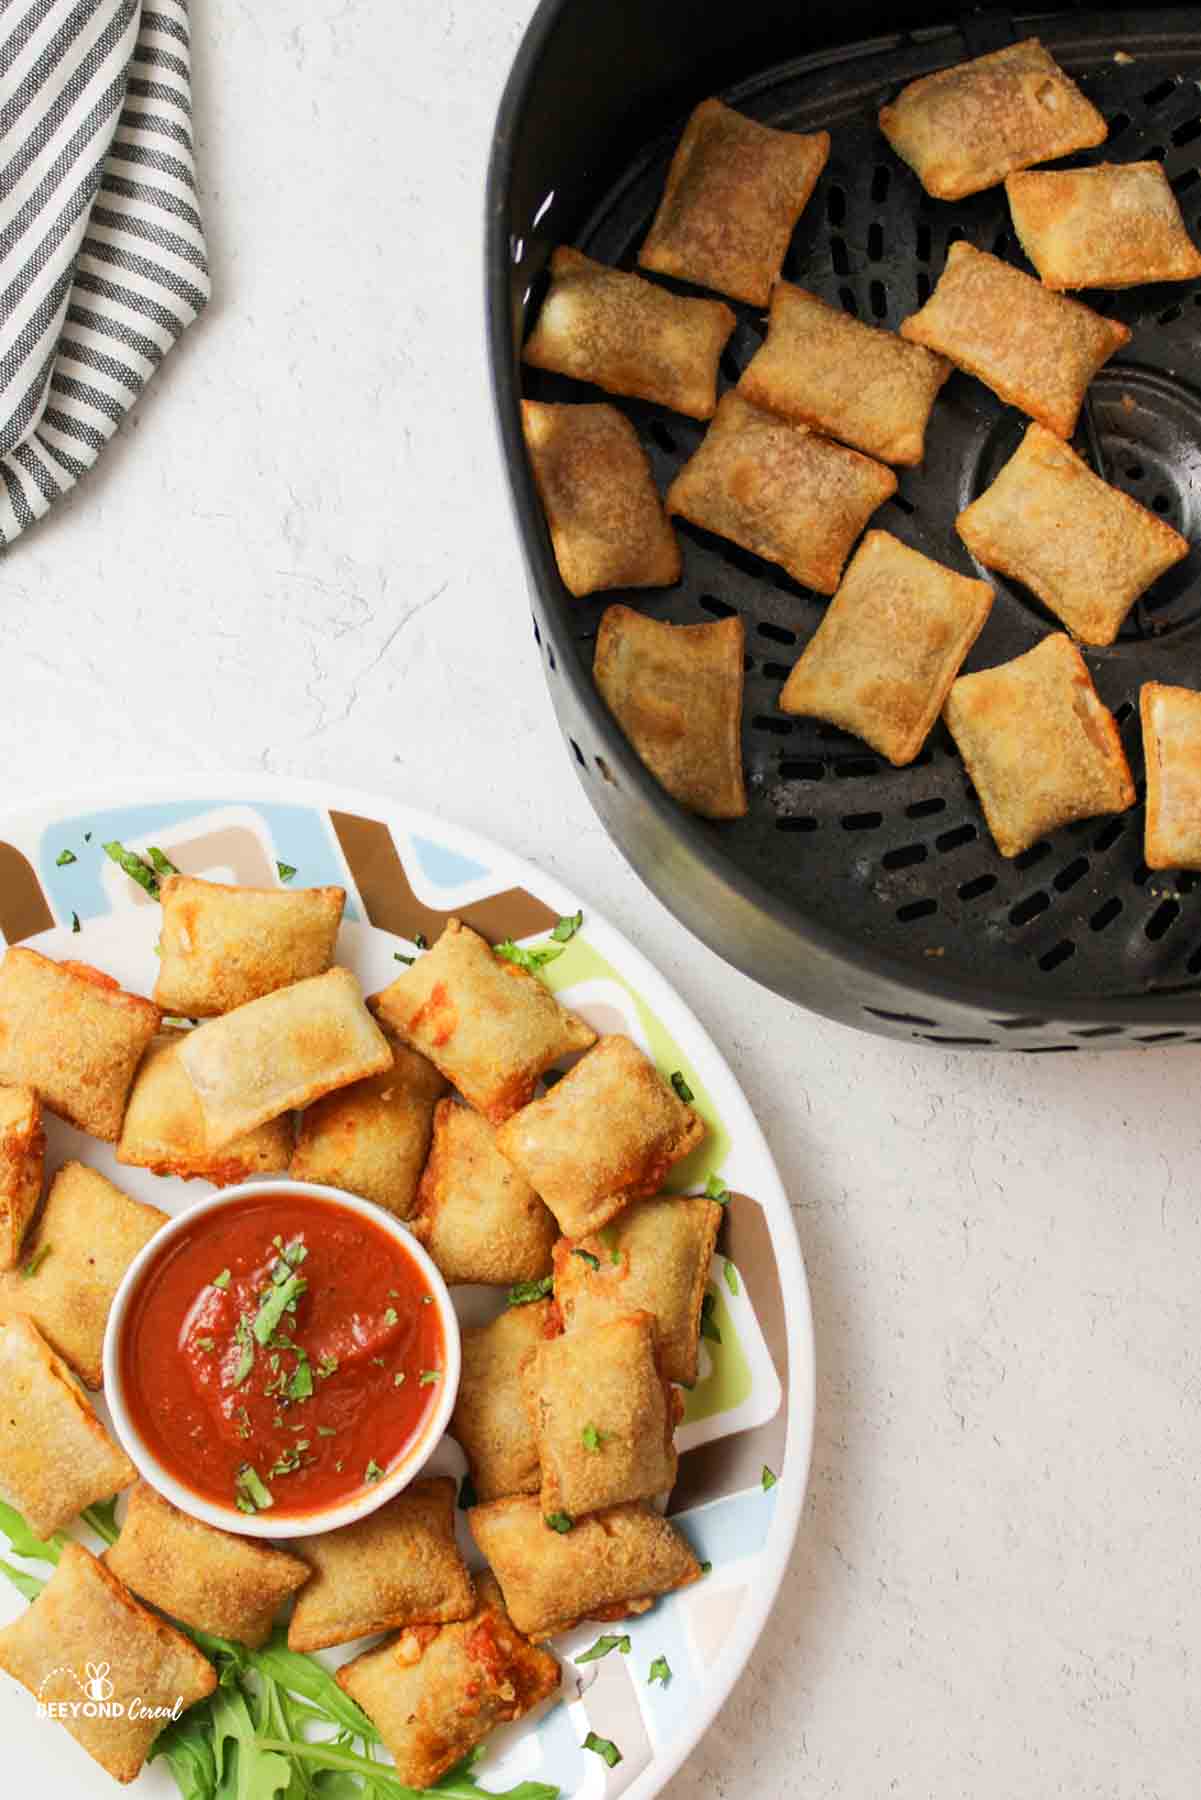 a plate of pizza rolls with marinara sauce next t an air fryer basket with more pizza rolls inside